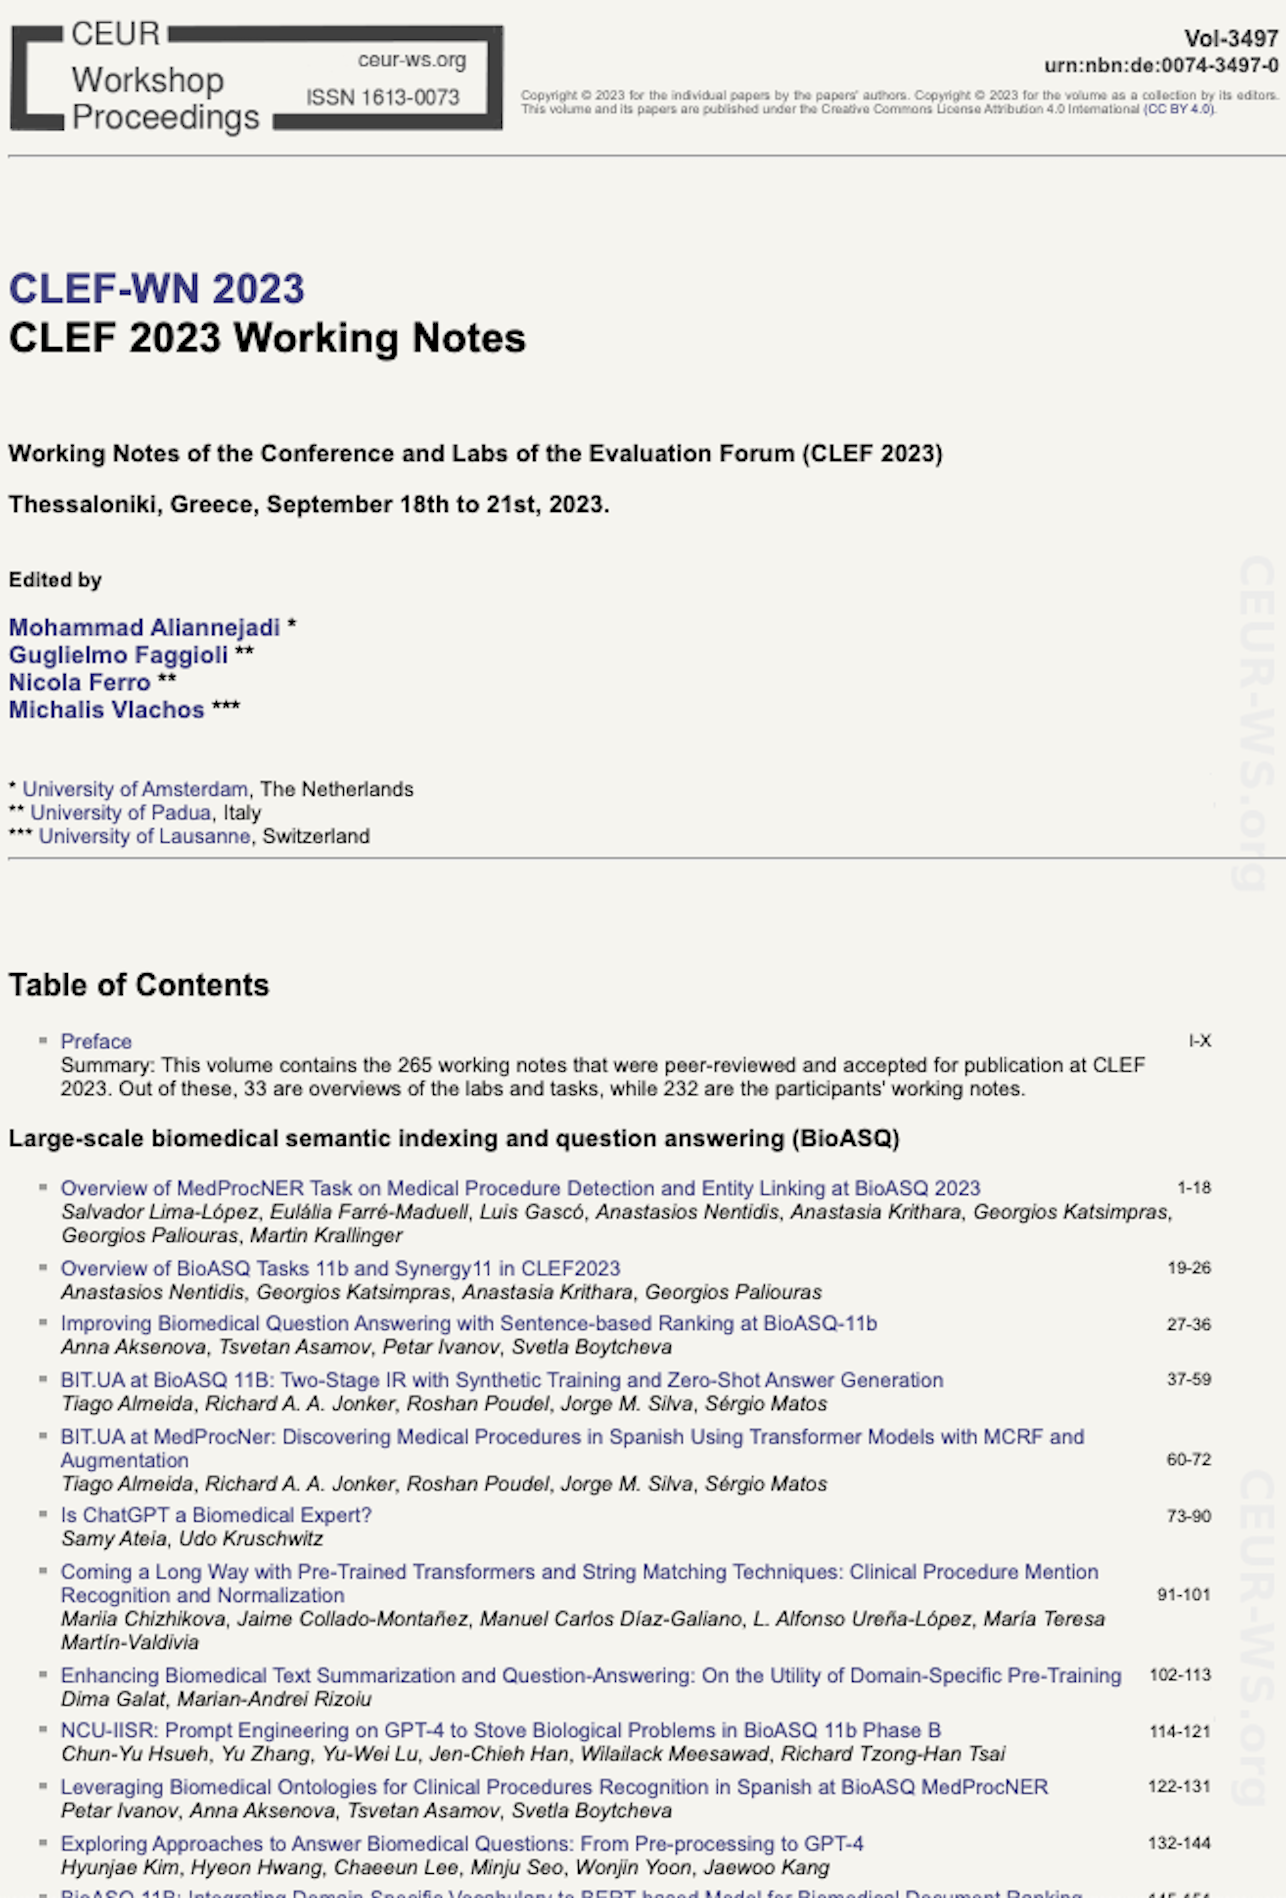 CLEF 2023 CEUR-WS Working Notes page